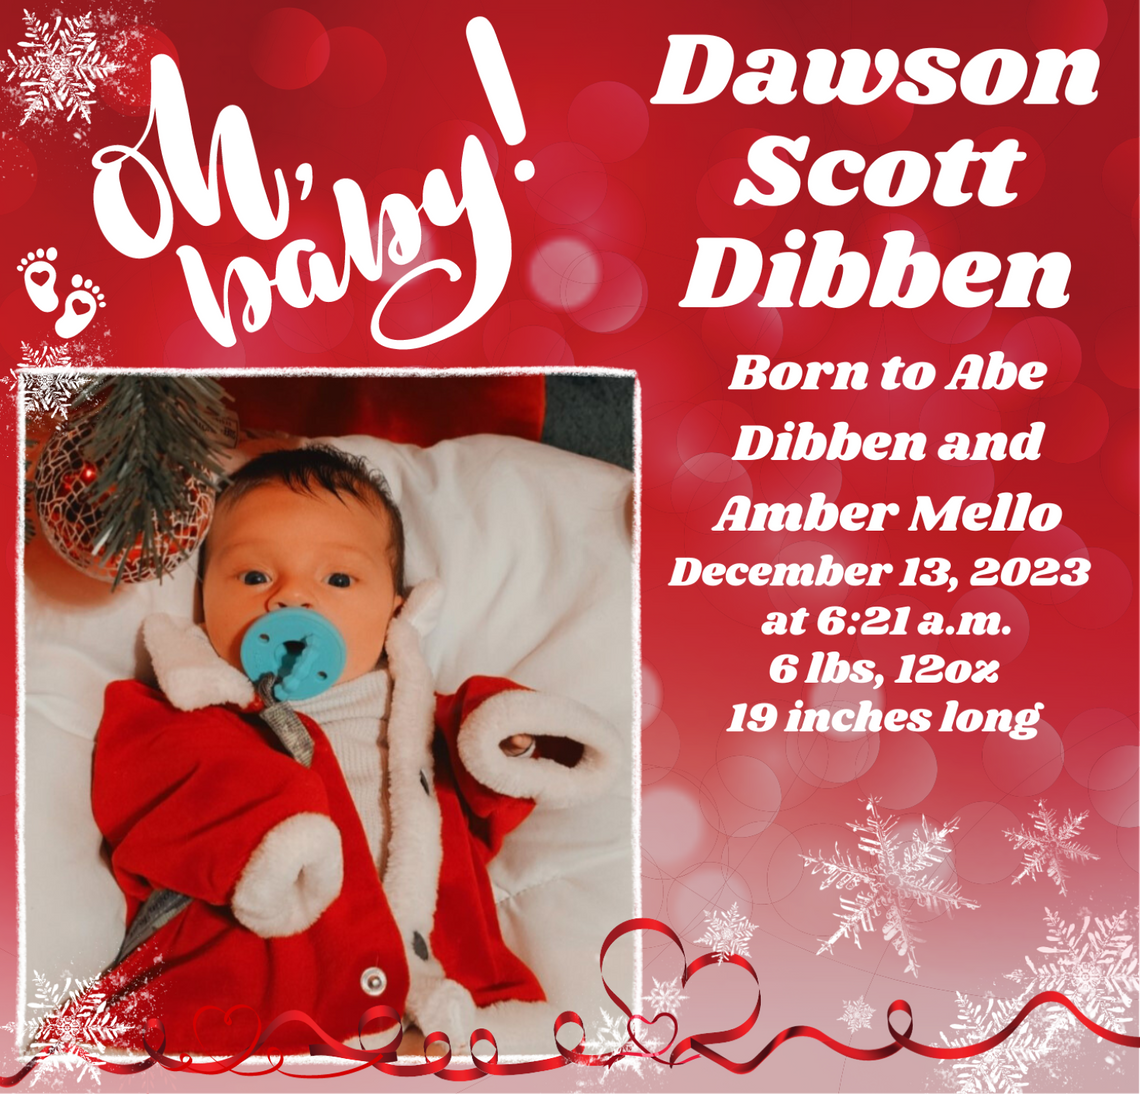 Announcements - Welcome Baby Dawson